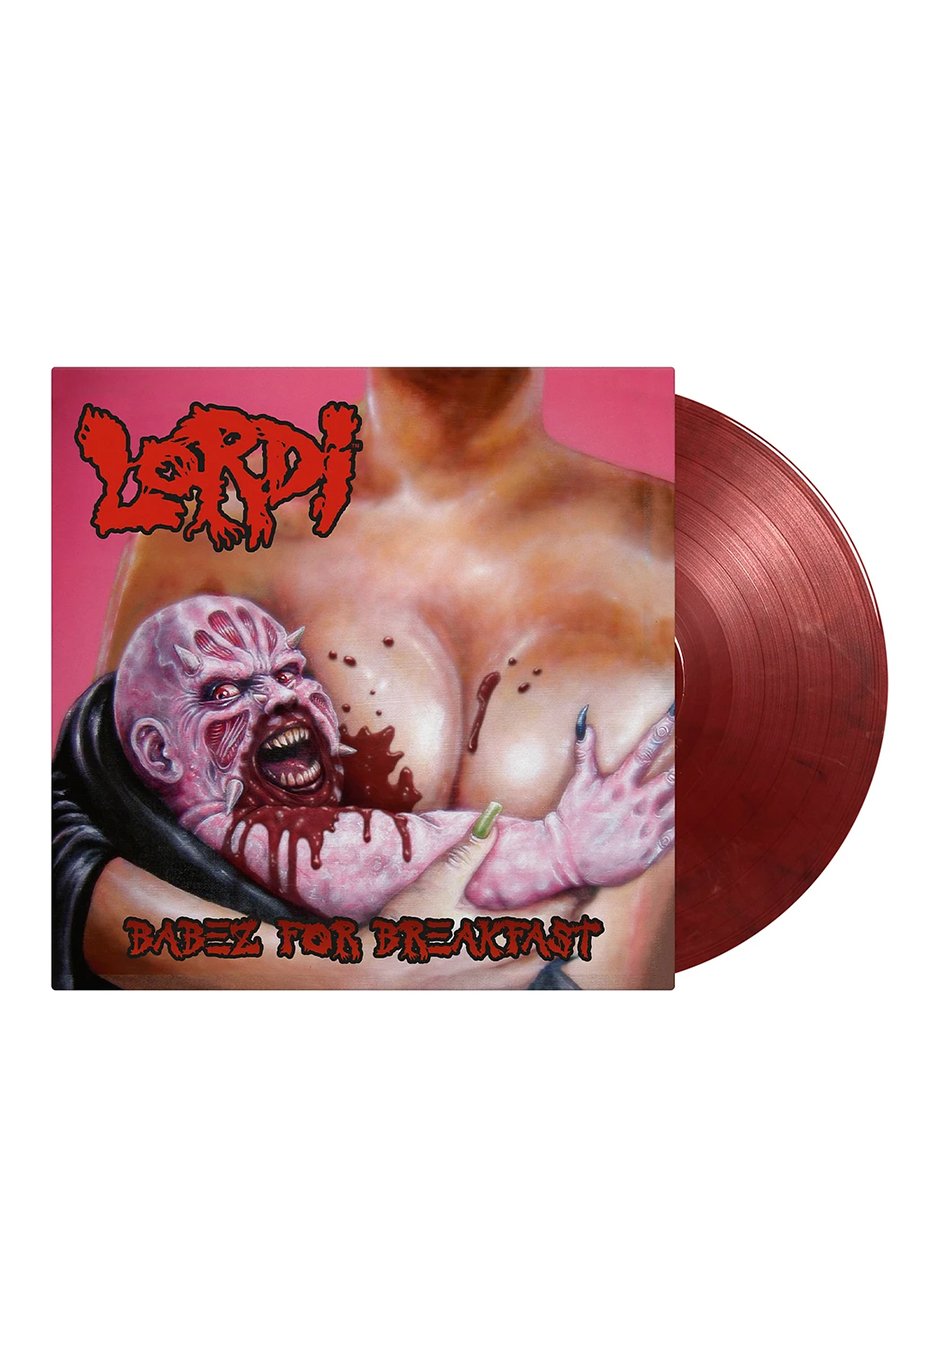 Lordi - Babez For Breakfast Ltd. Red - Colored Vinyl